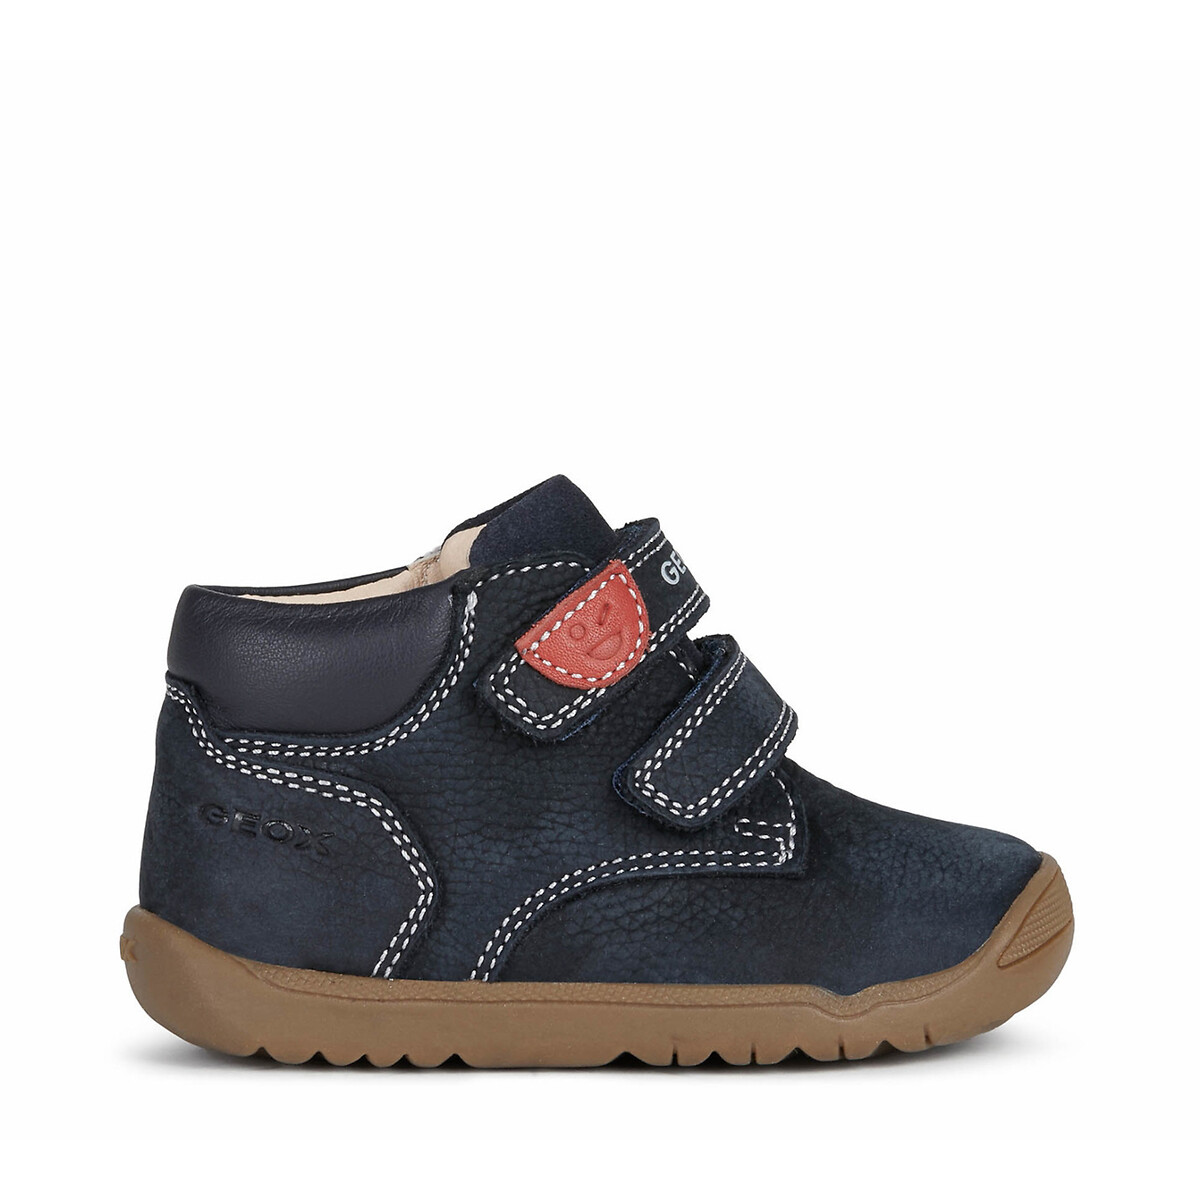 Image of Kids Macchia First Steps Trainers in Leather with Touch 'n' Close Fastening